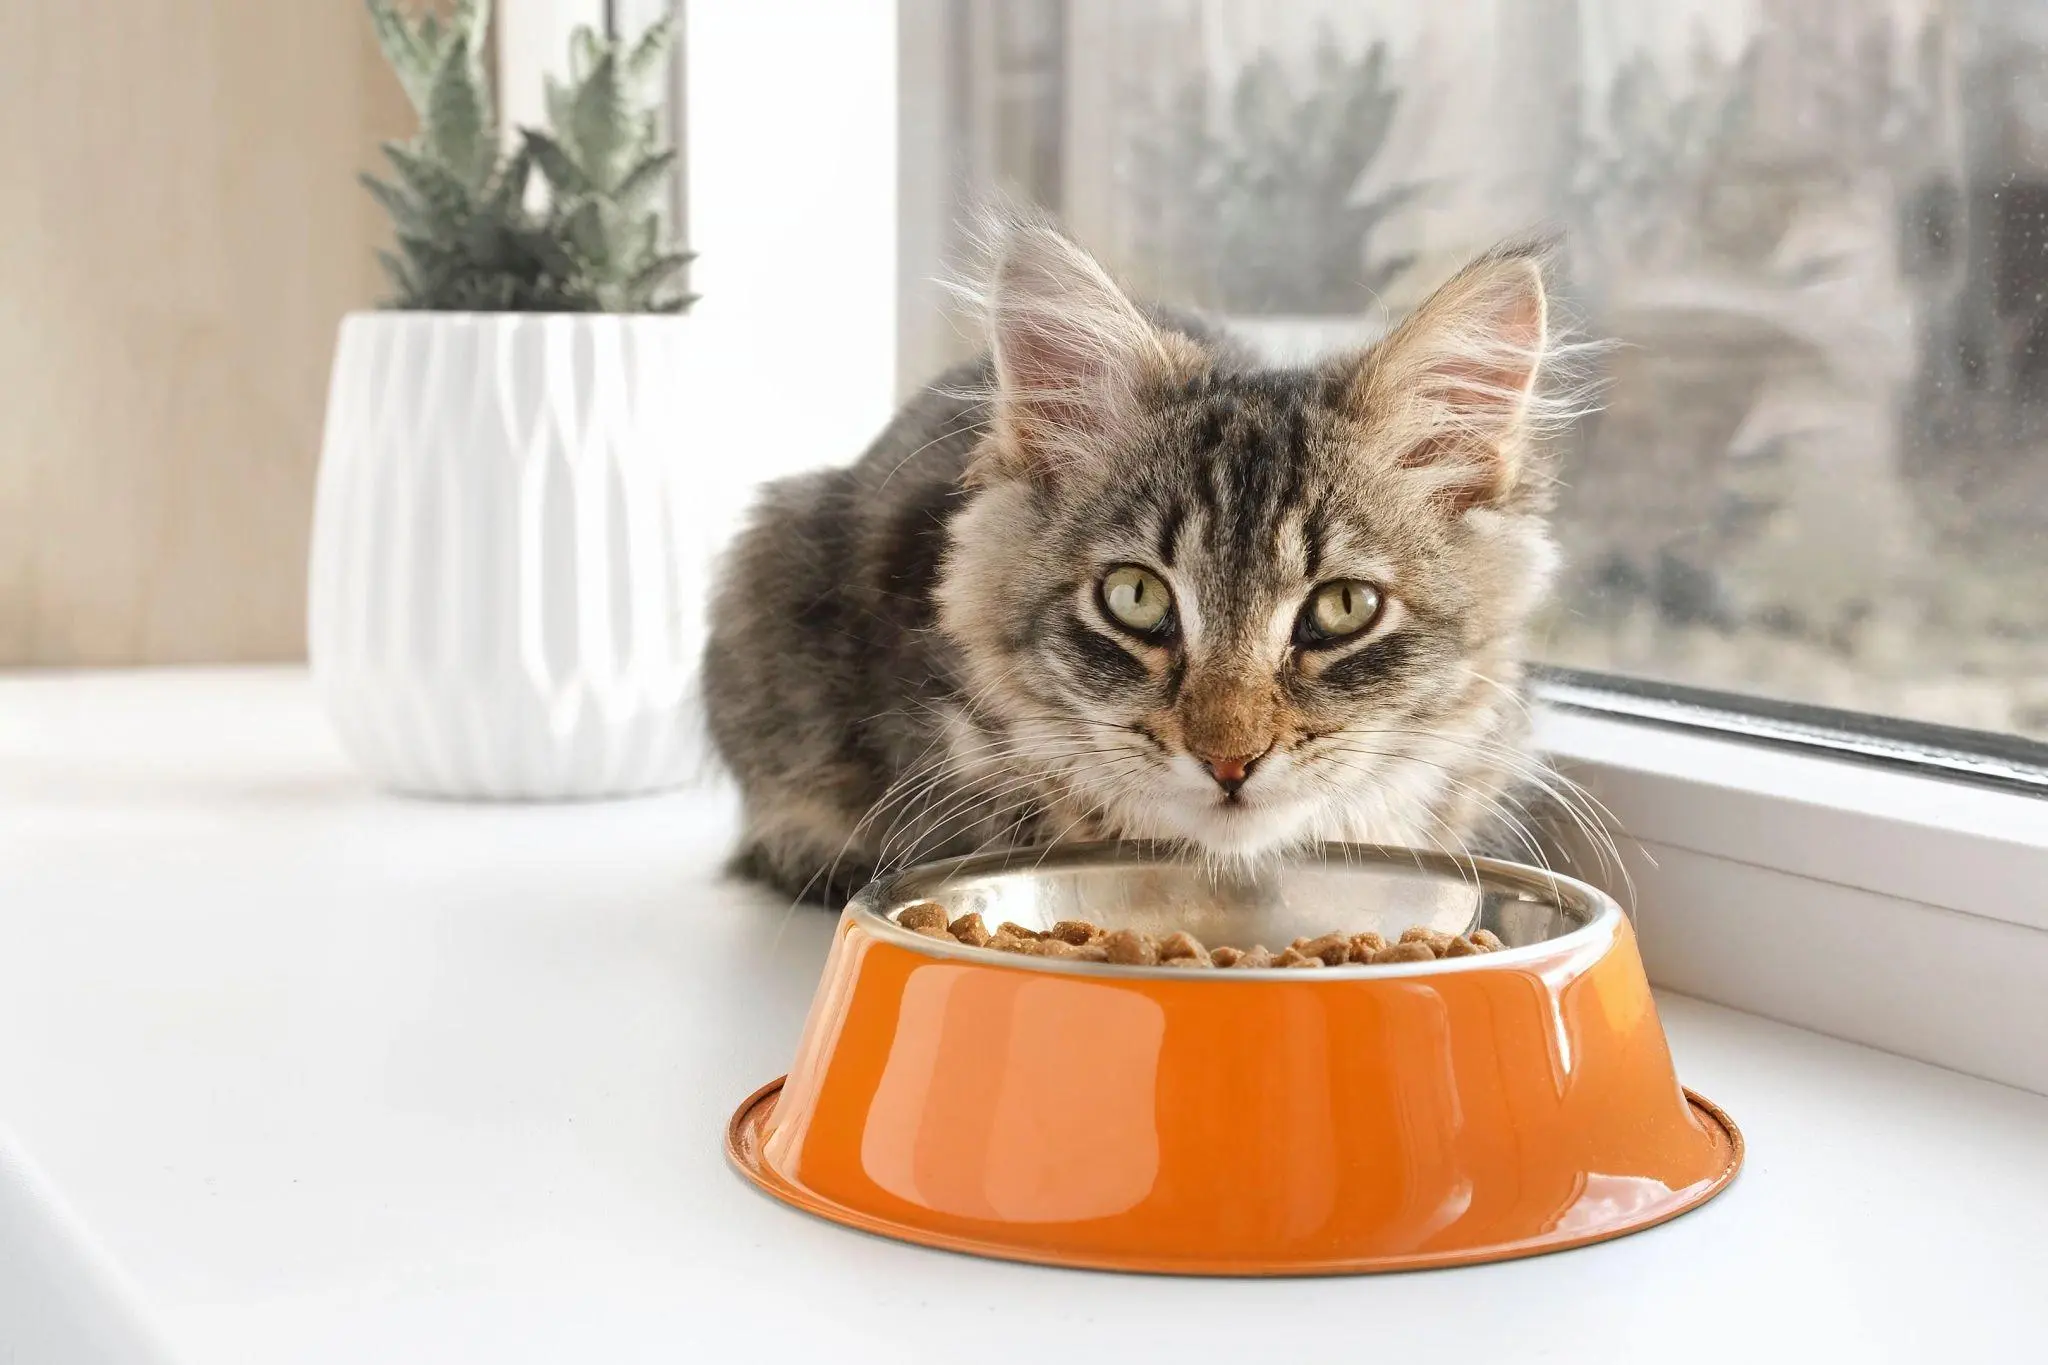 Should My Cat Eat Wet or Dry Food? The Debate, Settled